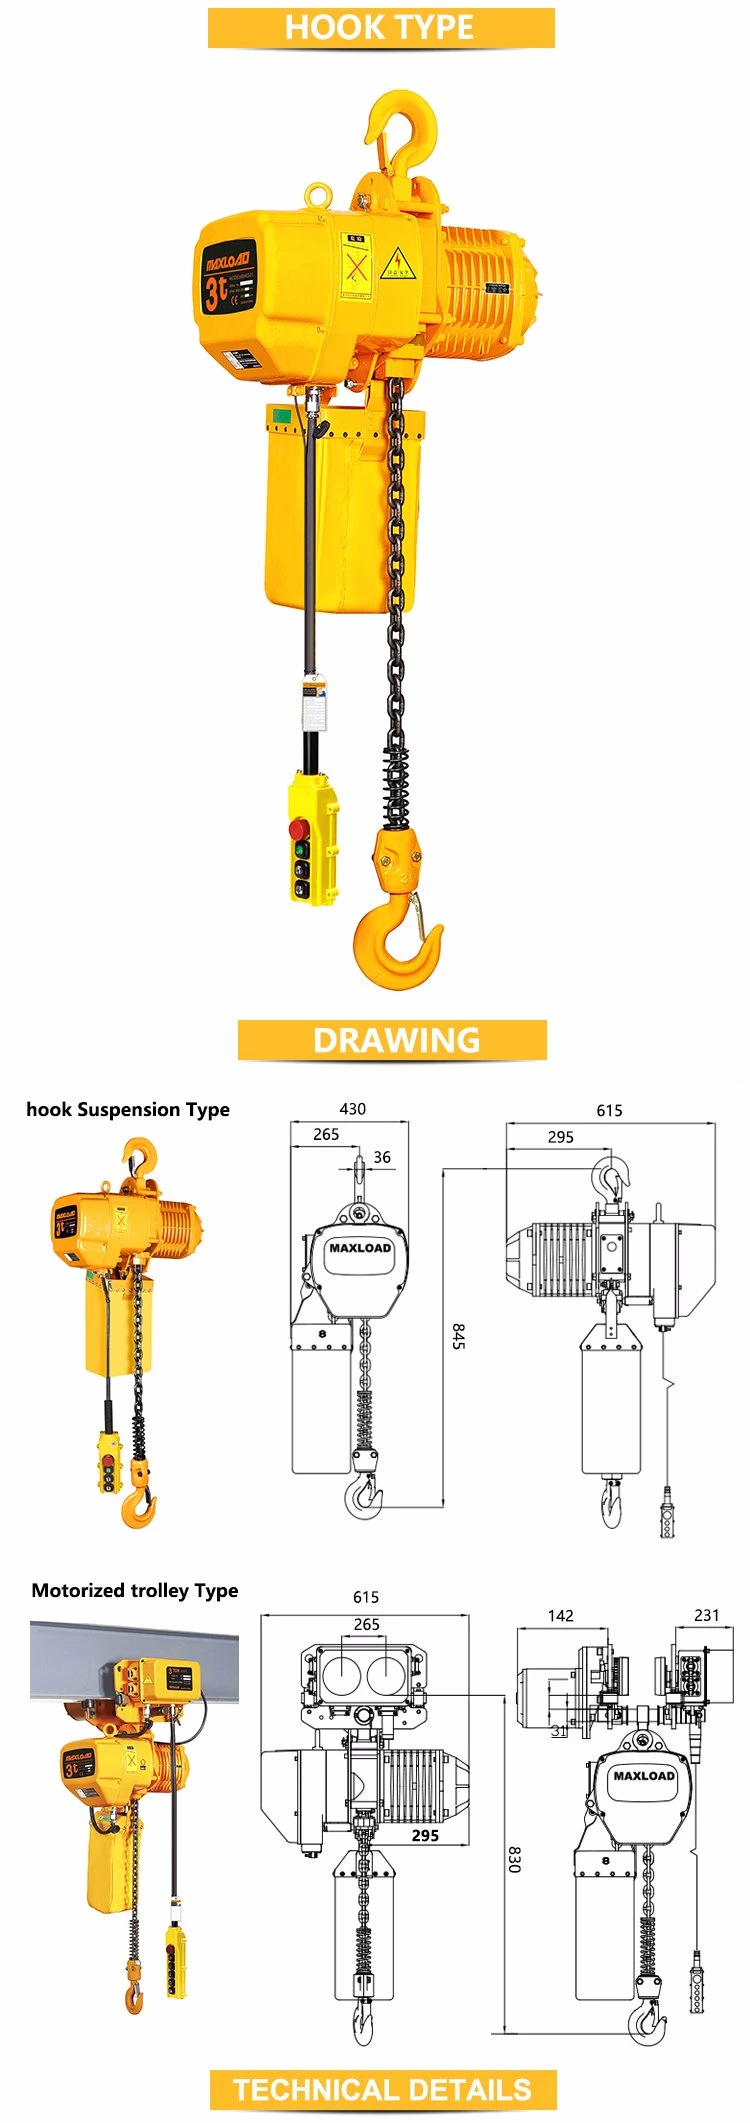 3 Ton Hhbb Type Electric Chain Hoist for Lifting with Hook Suspension